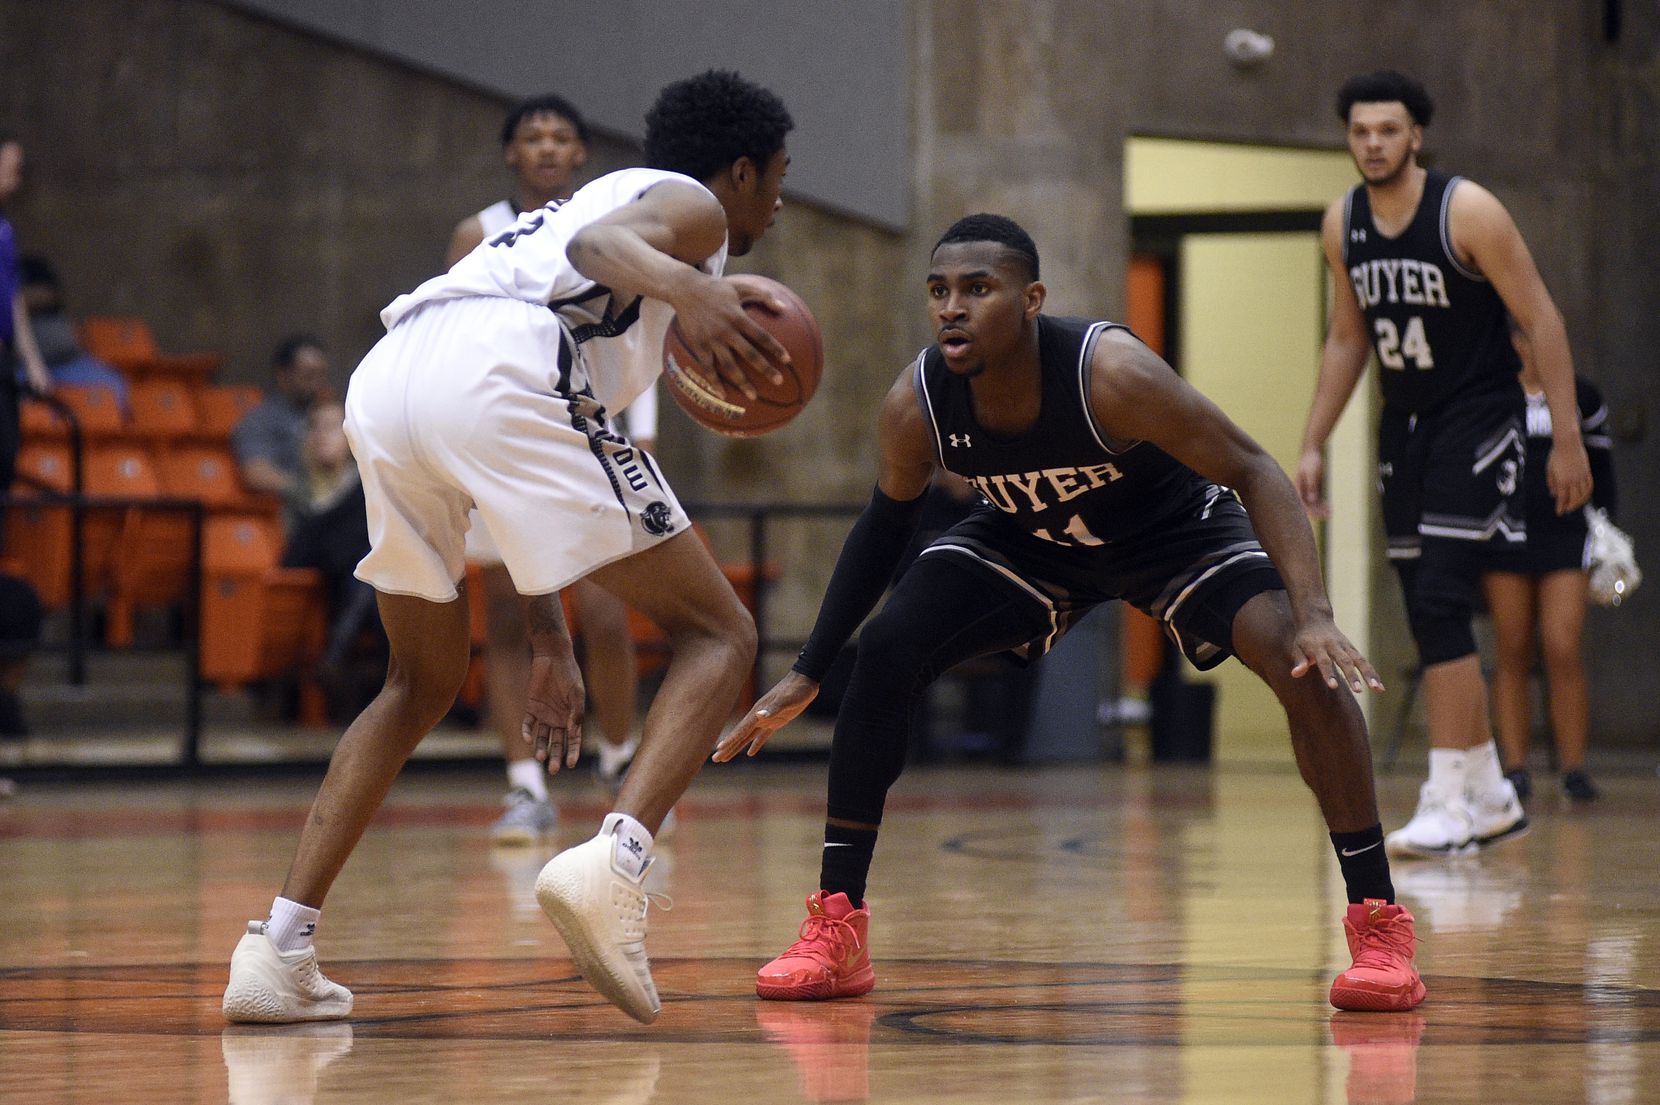 Denton Guyer senior guard De'Vion Harmon (11) defends against Odessia Permian players during the game at the Wilkerson-Greines Athletic Center in Fort Worth, Texas on Friday, March 1.